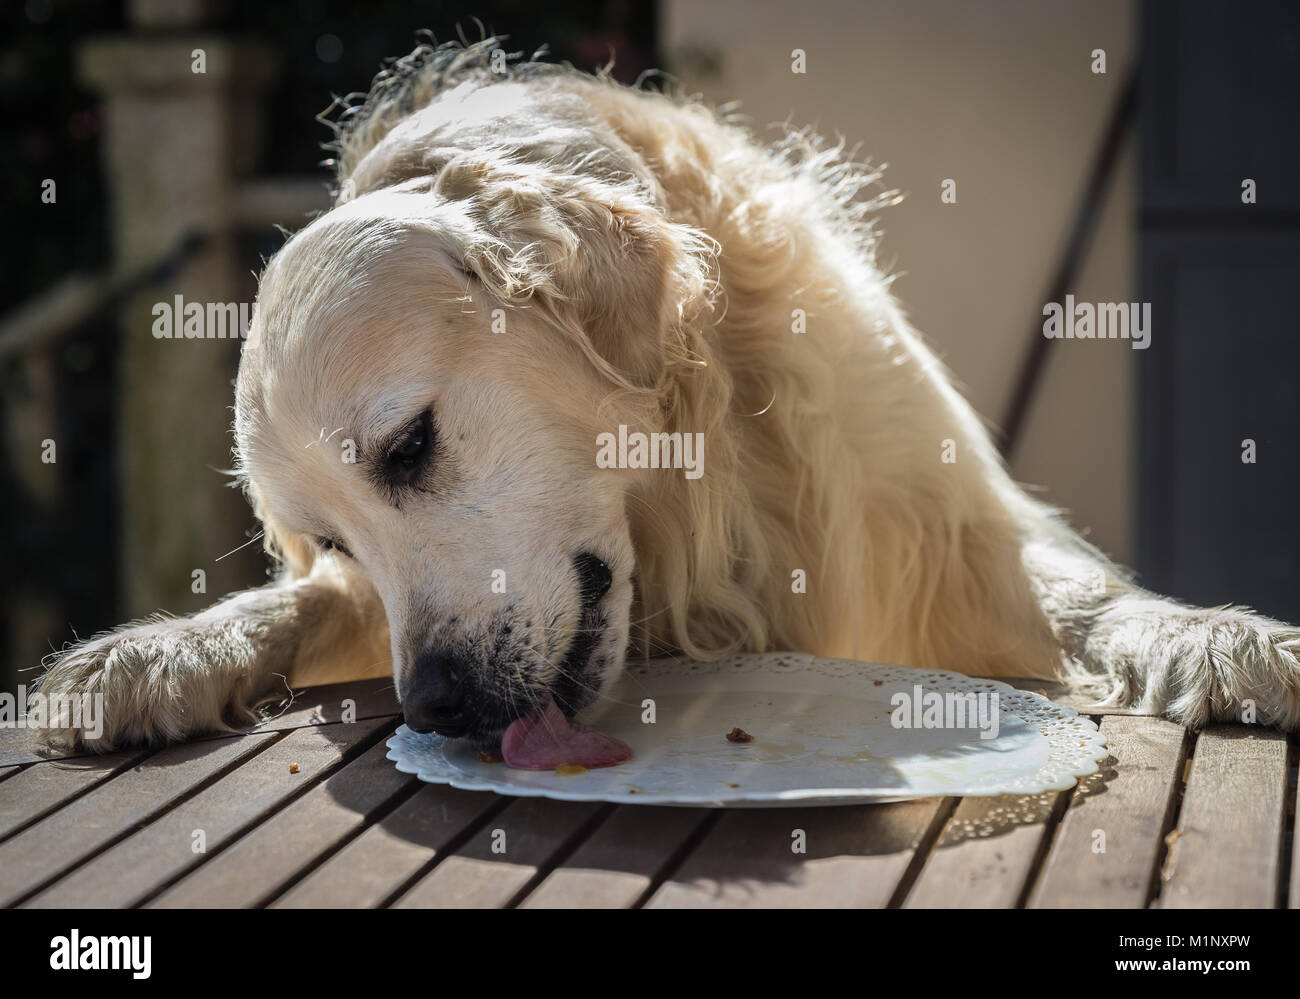 the birthday celebration of my golden dog named Prince, which devours in record time a dog cake, with facial expressions and gestures that make them l Stock Photo